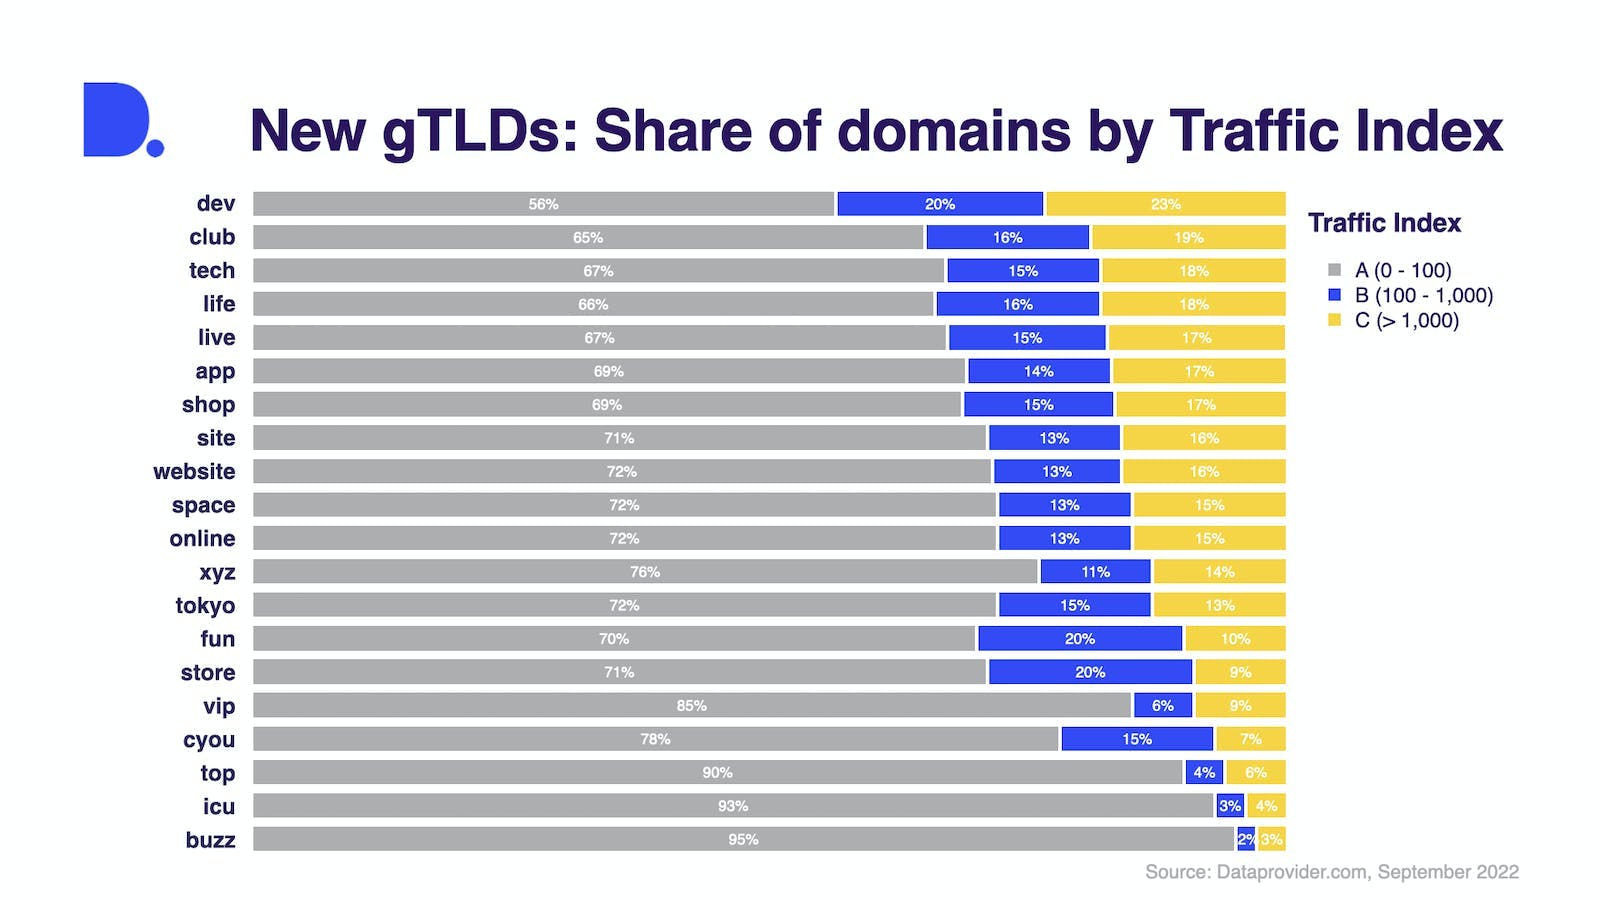 Share of new gTLD domains by Traffic Index (A = little to no traffic; B = moderate traffic; C = high traffic)